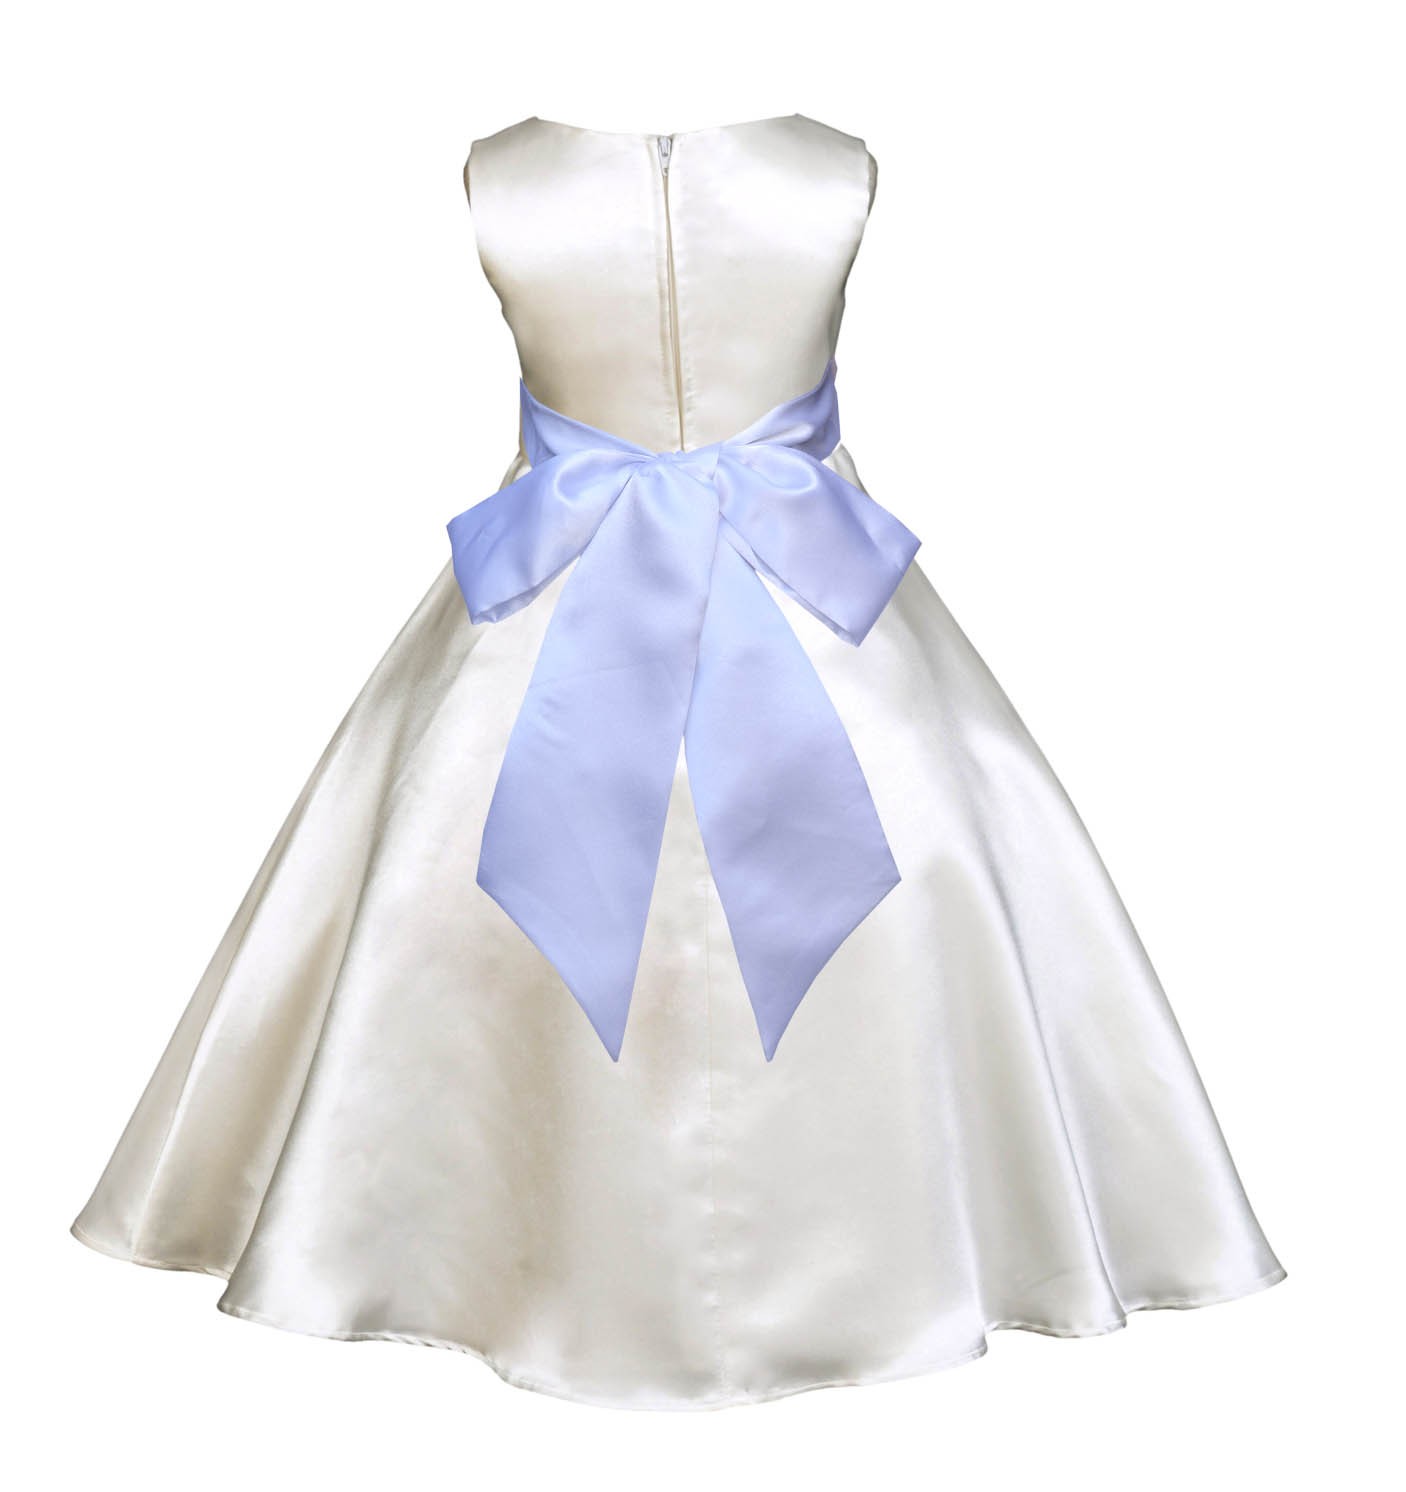 Ivory/White A-Line Satin Flower Girl Dress Pageant Reception 821S